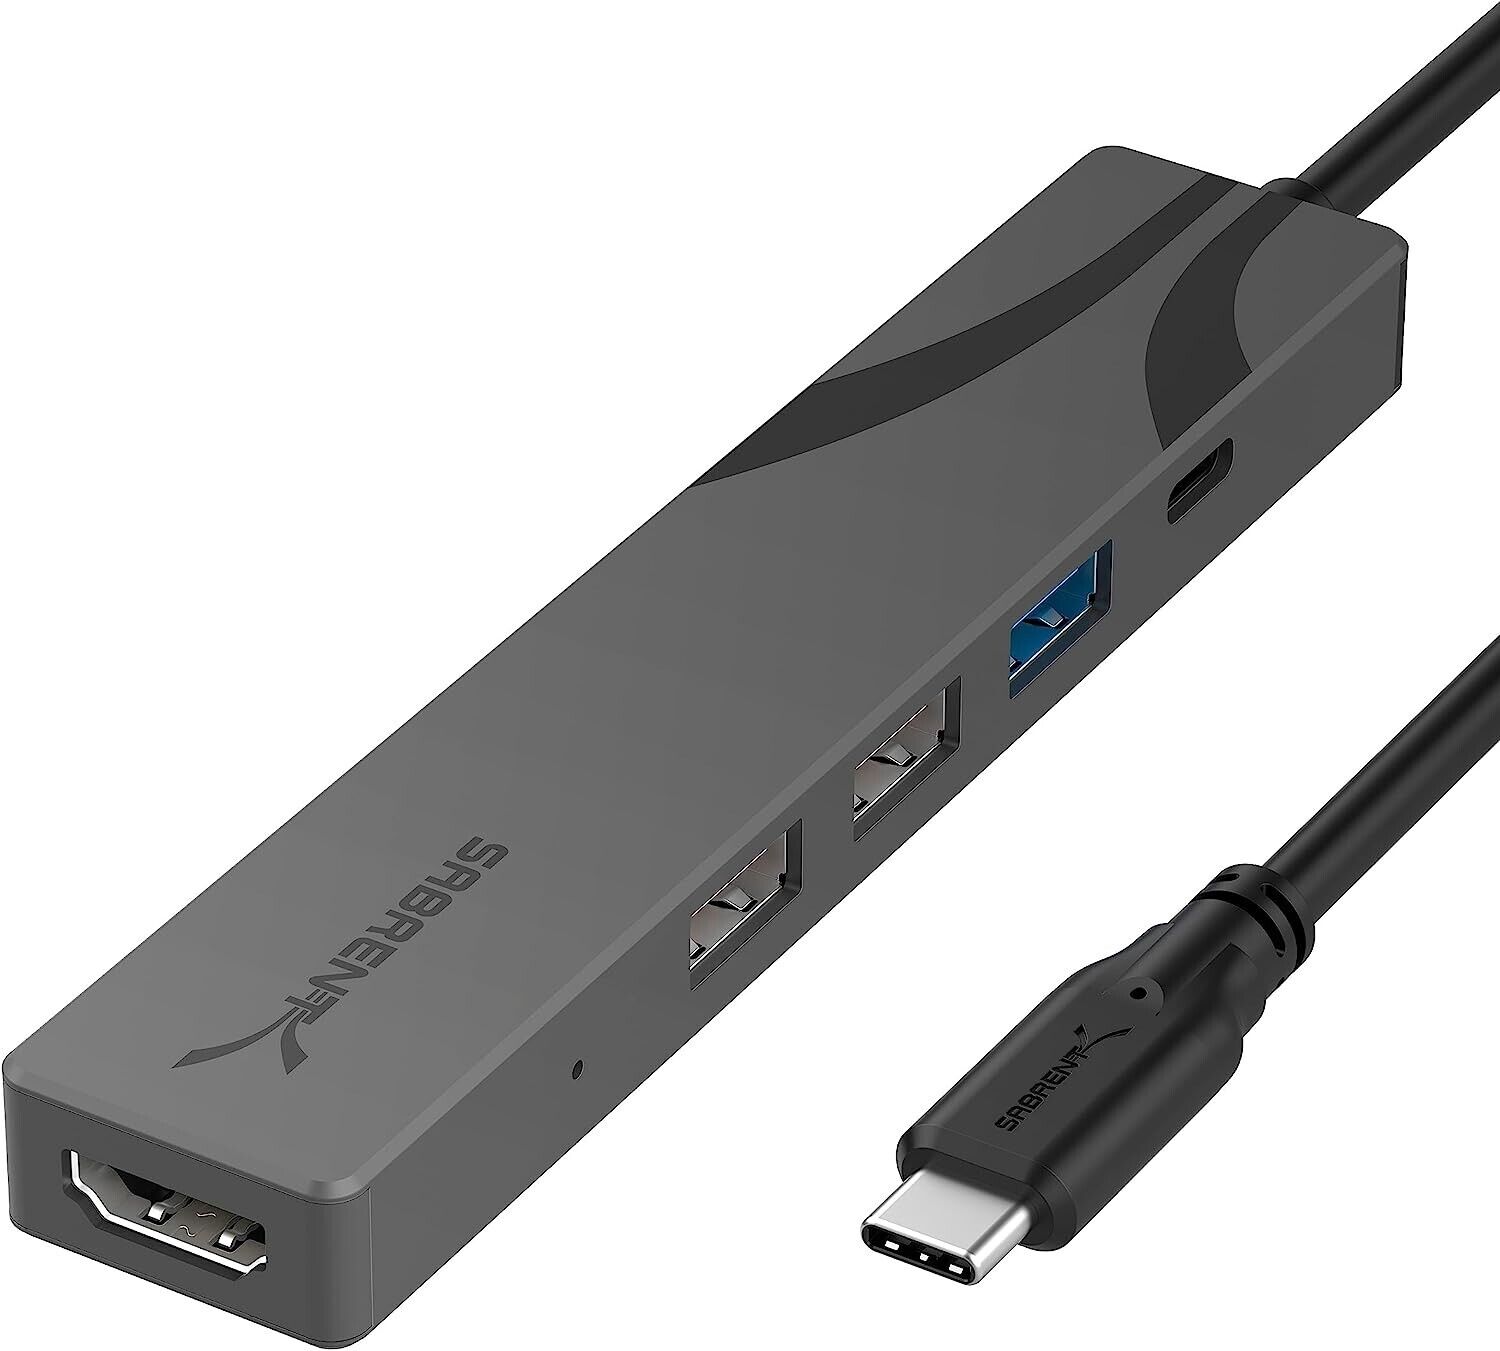 New - SABRENT Multi-Port USB-C Hub with Power Delivery and HDMI Out [HB-SHPU]